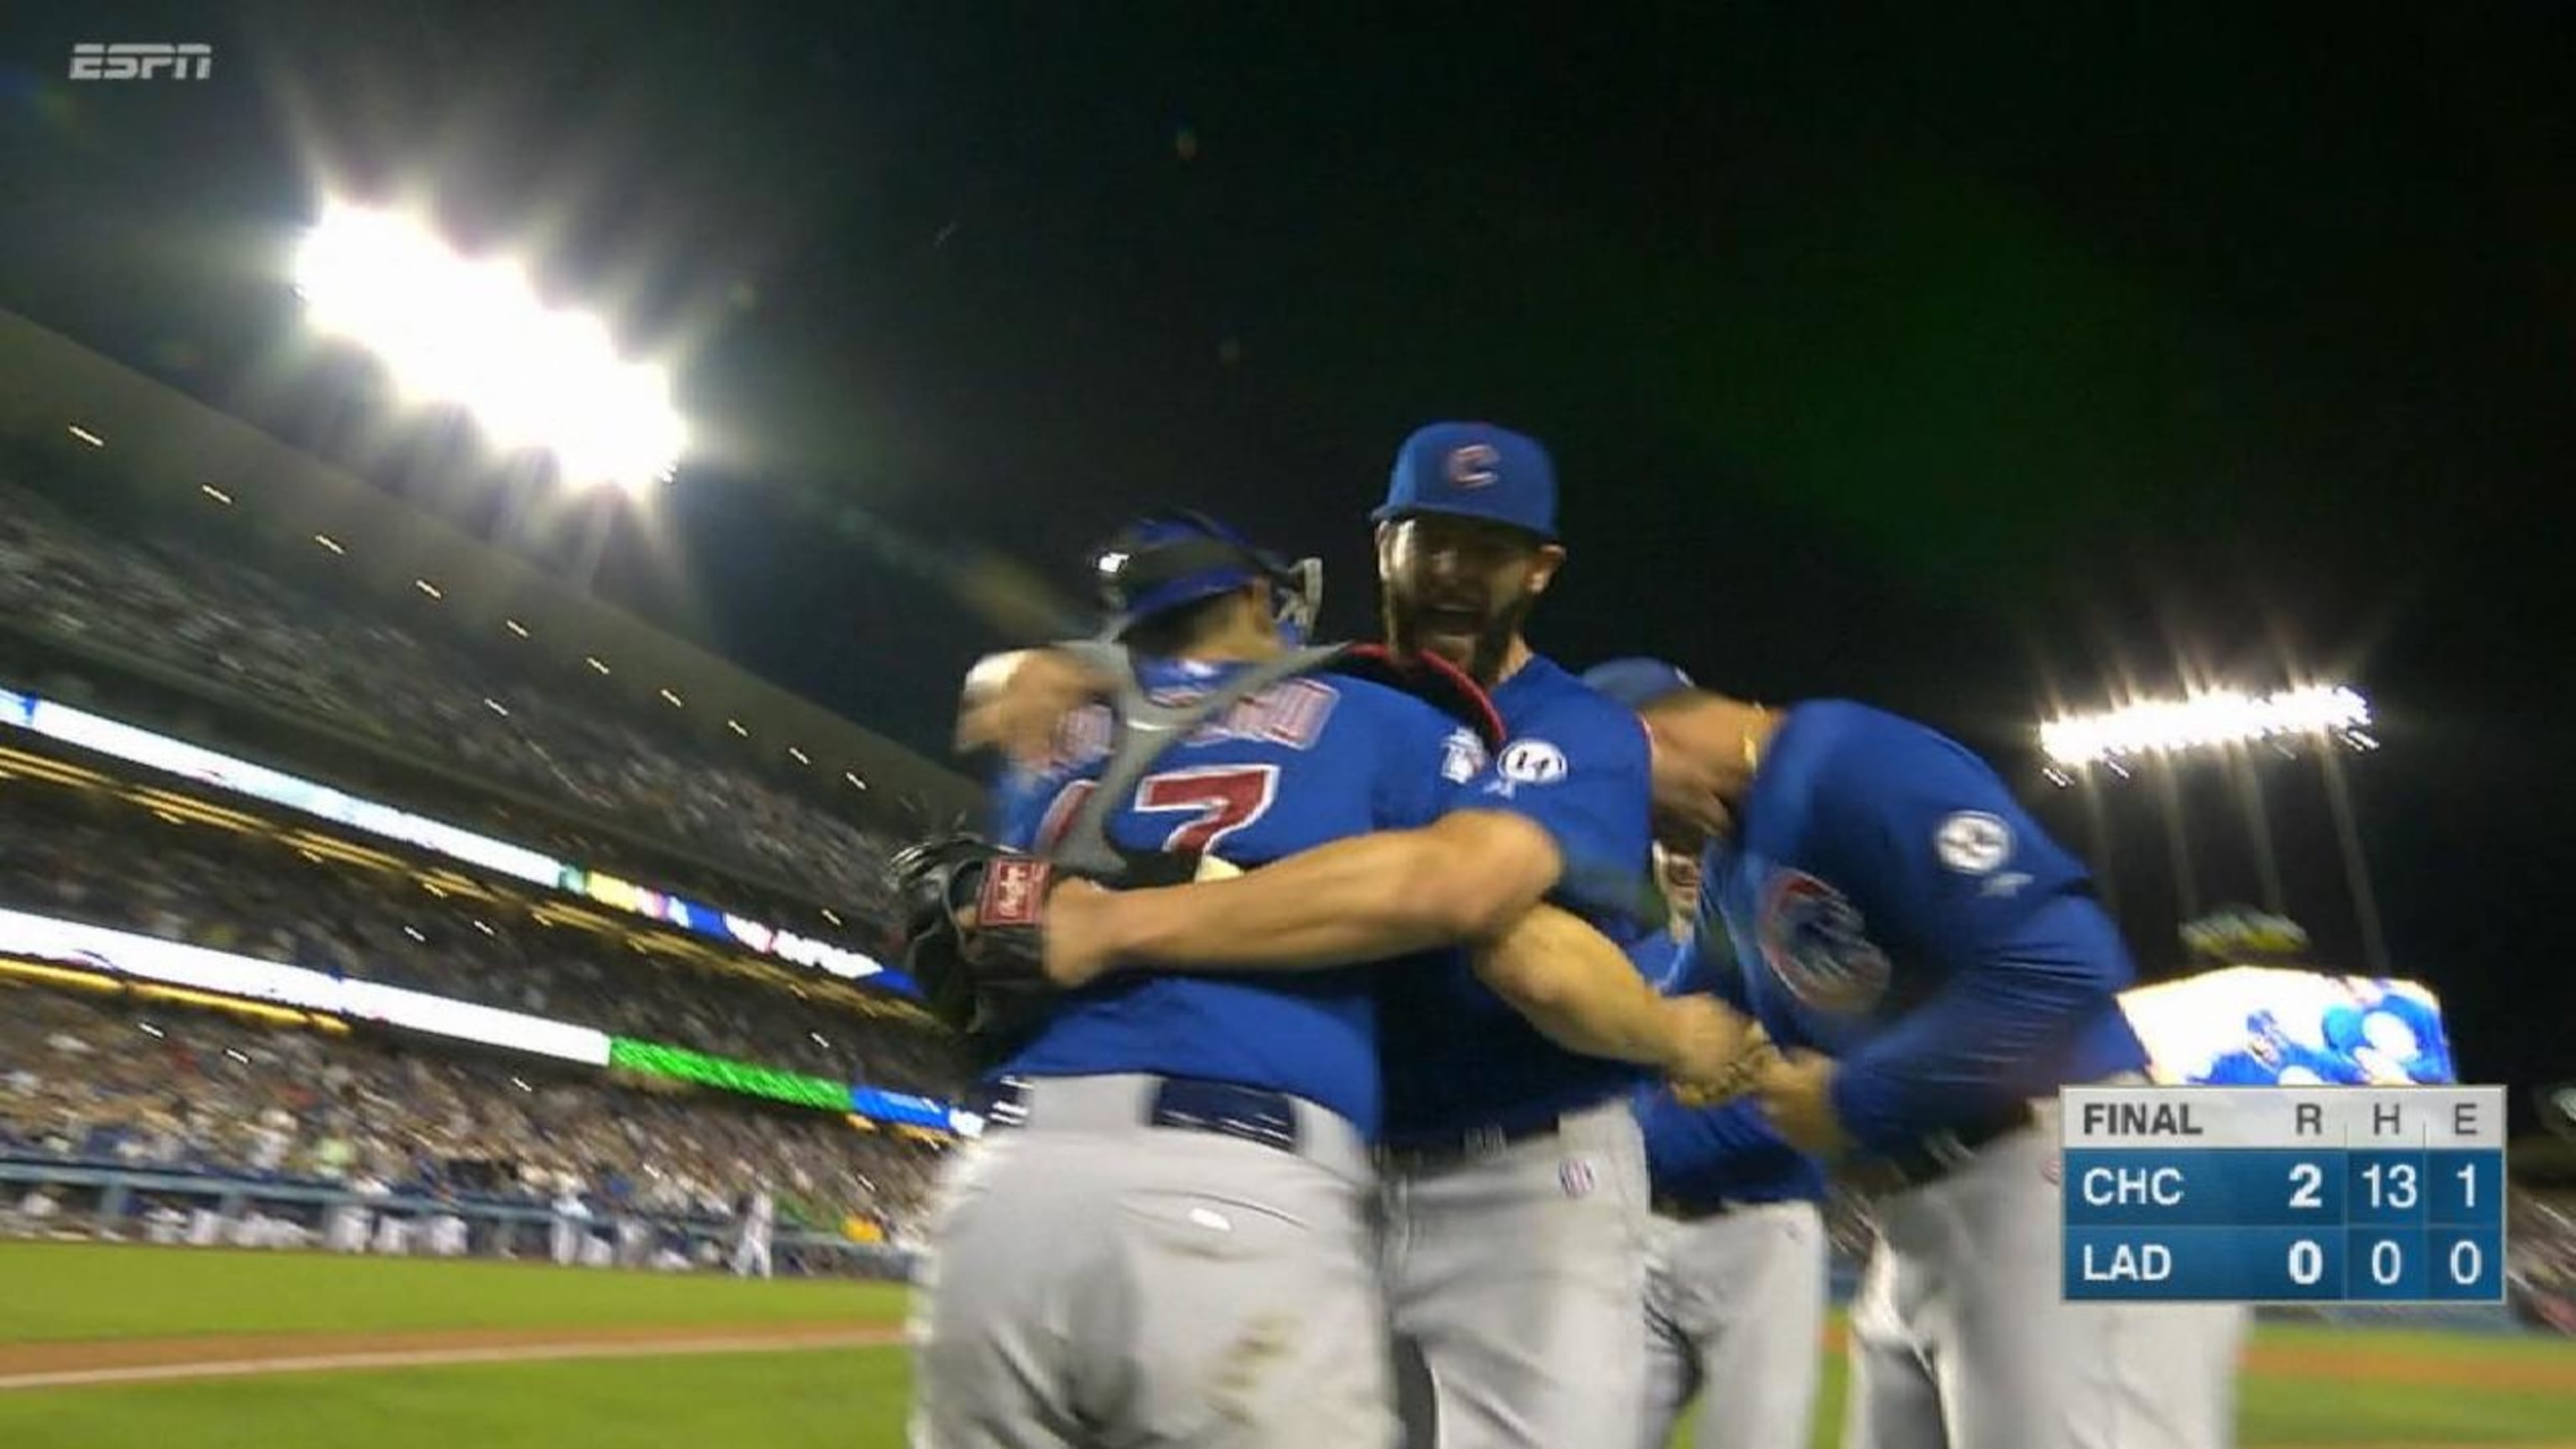 On this day, Jake Arrieta threw his second no-hitter with the Cubs